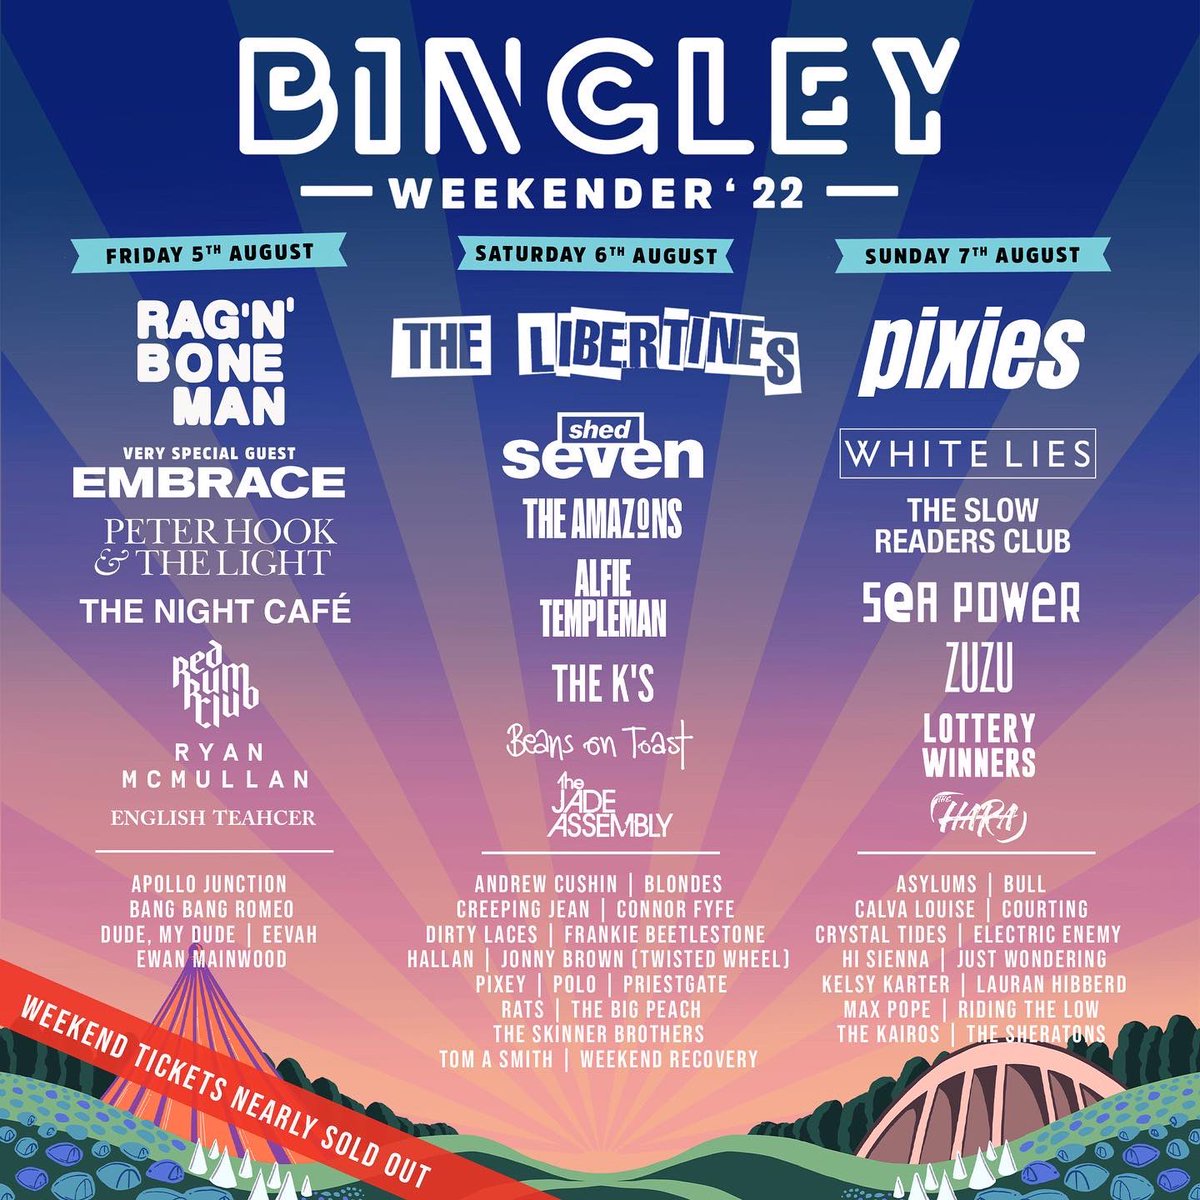 Just look at that Weekend line-up @BingleyWeekend 😍 …and it’s nearly SOLD OUT!!! We’re playing on the Friday ✌🏻 Let us know if you’re going to be there?